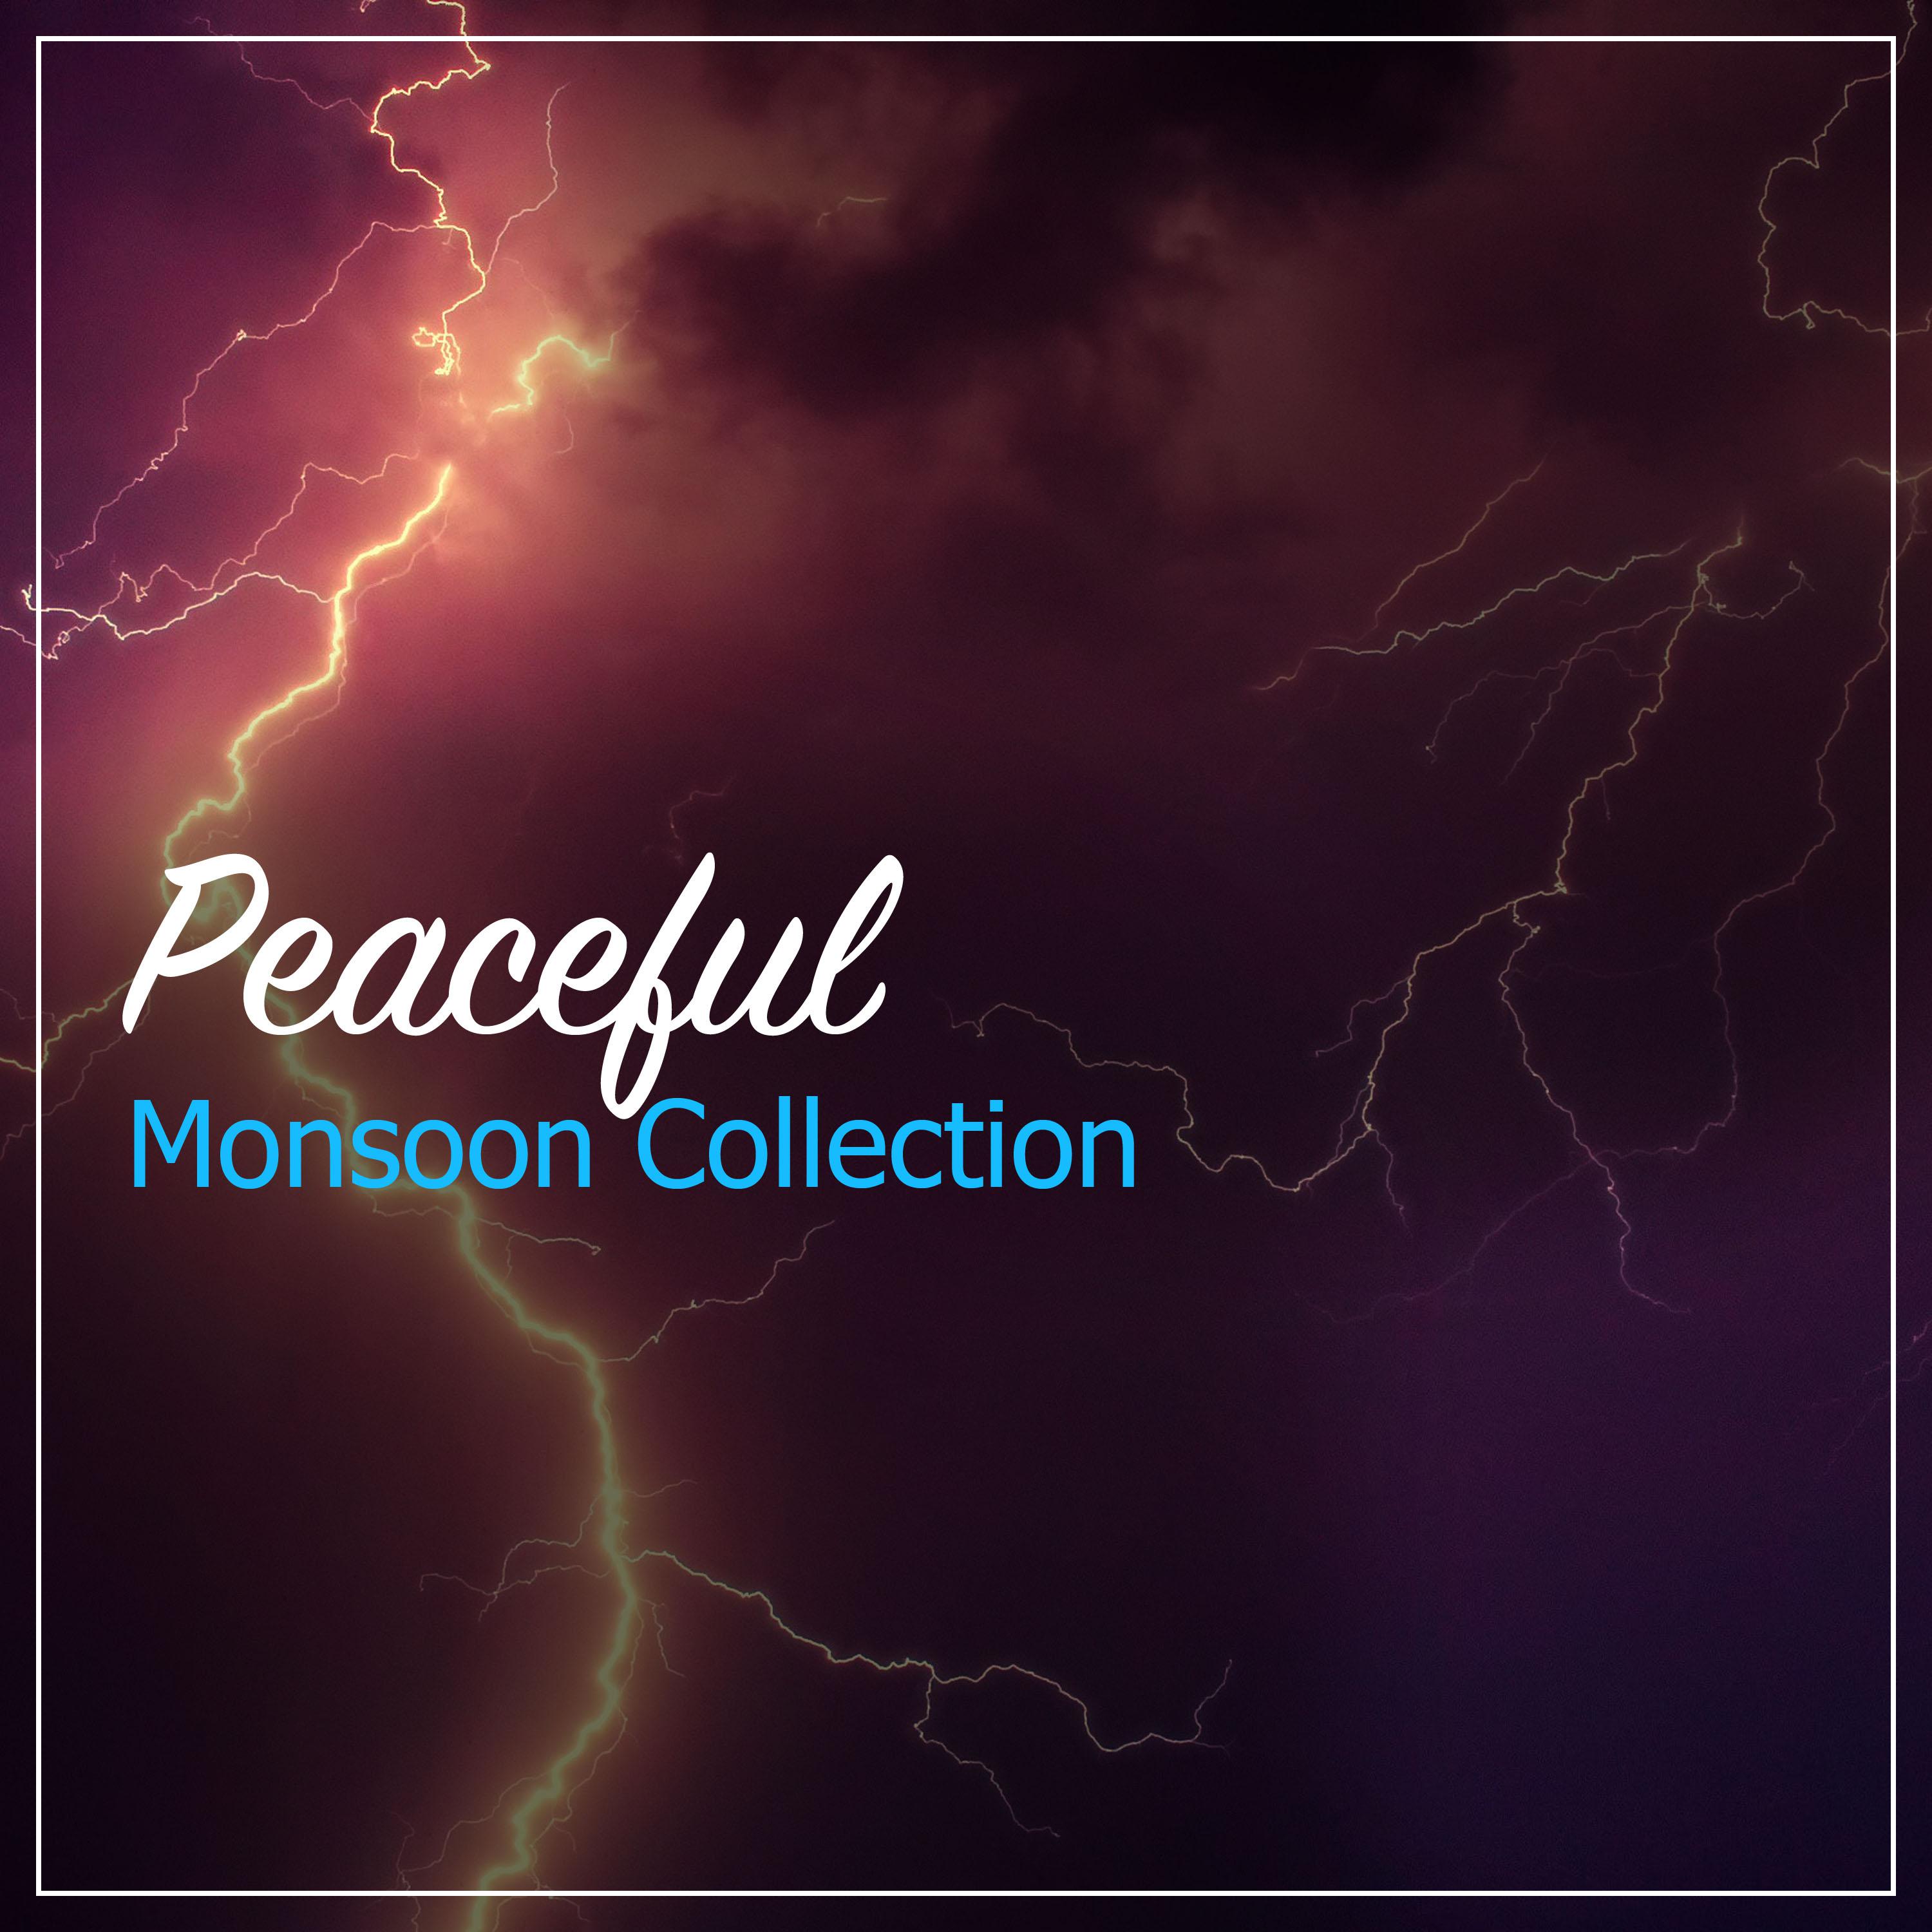 #15 Peaceful Monsoon Collection